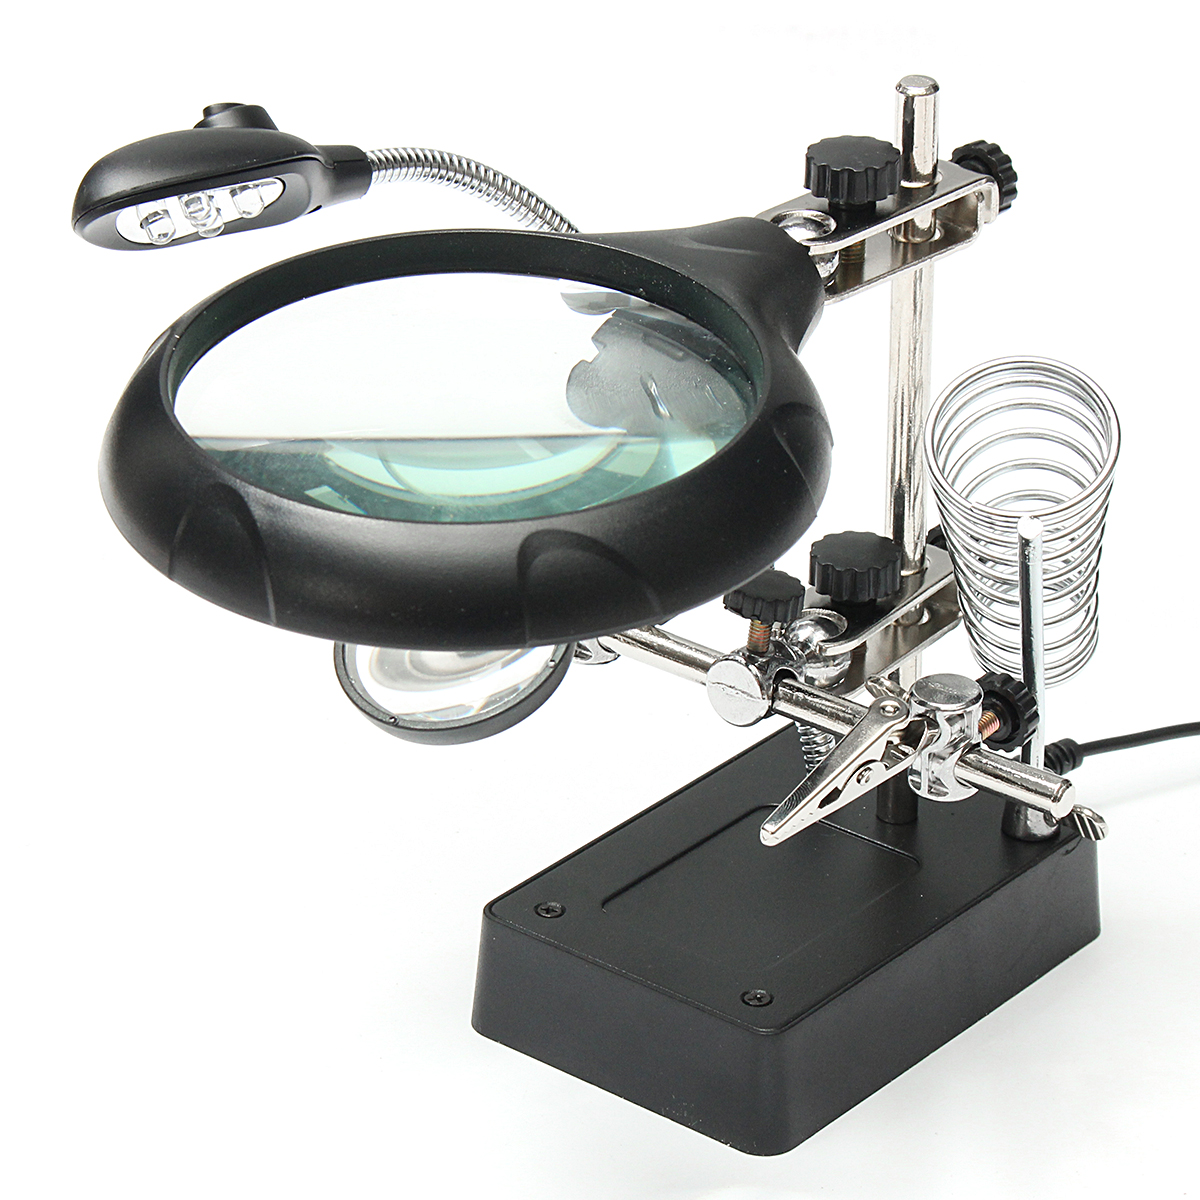 5-LED-Light-Magnifier-Magnifying-Glass-Helping-Hand-Soldering-Stand-with-3-Lens-1121941-3